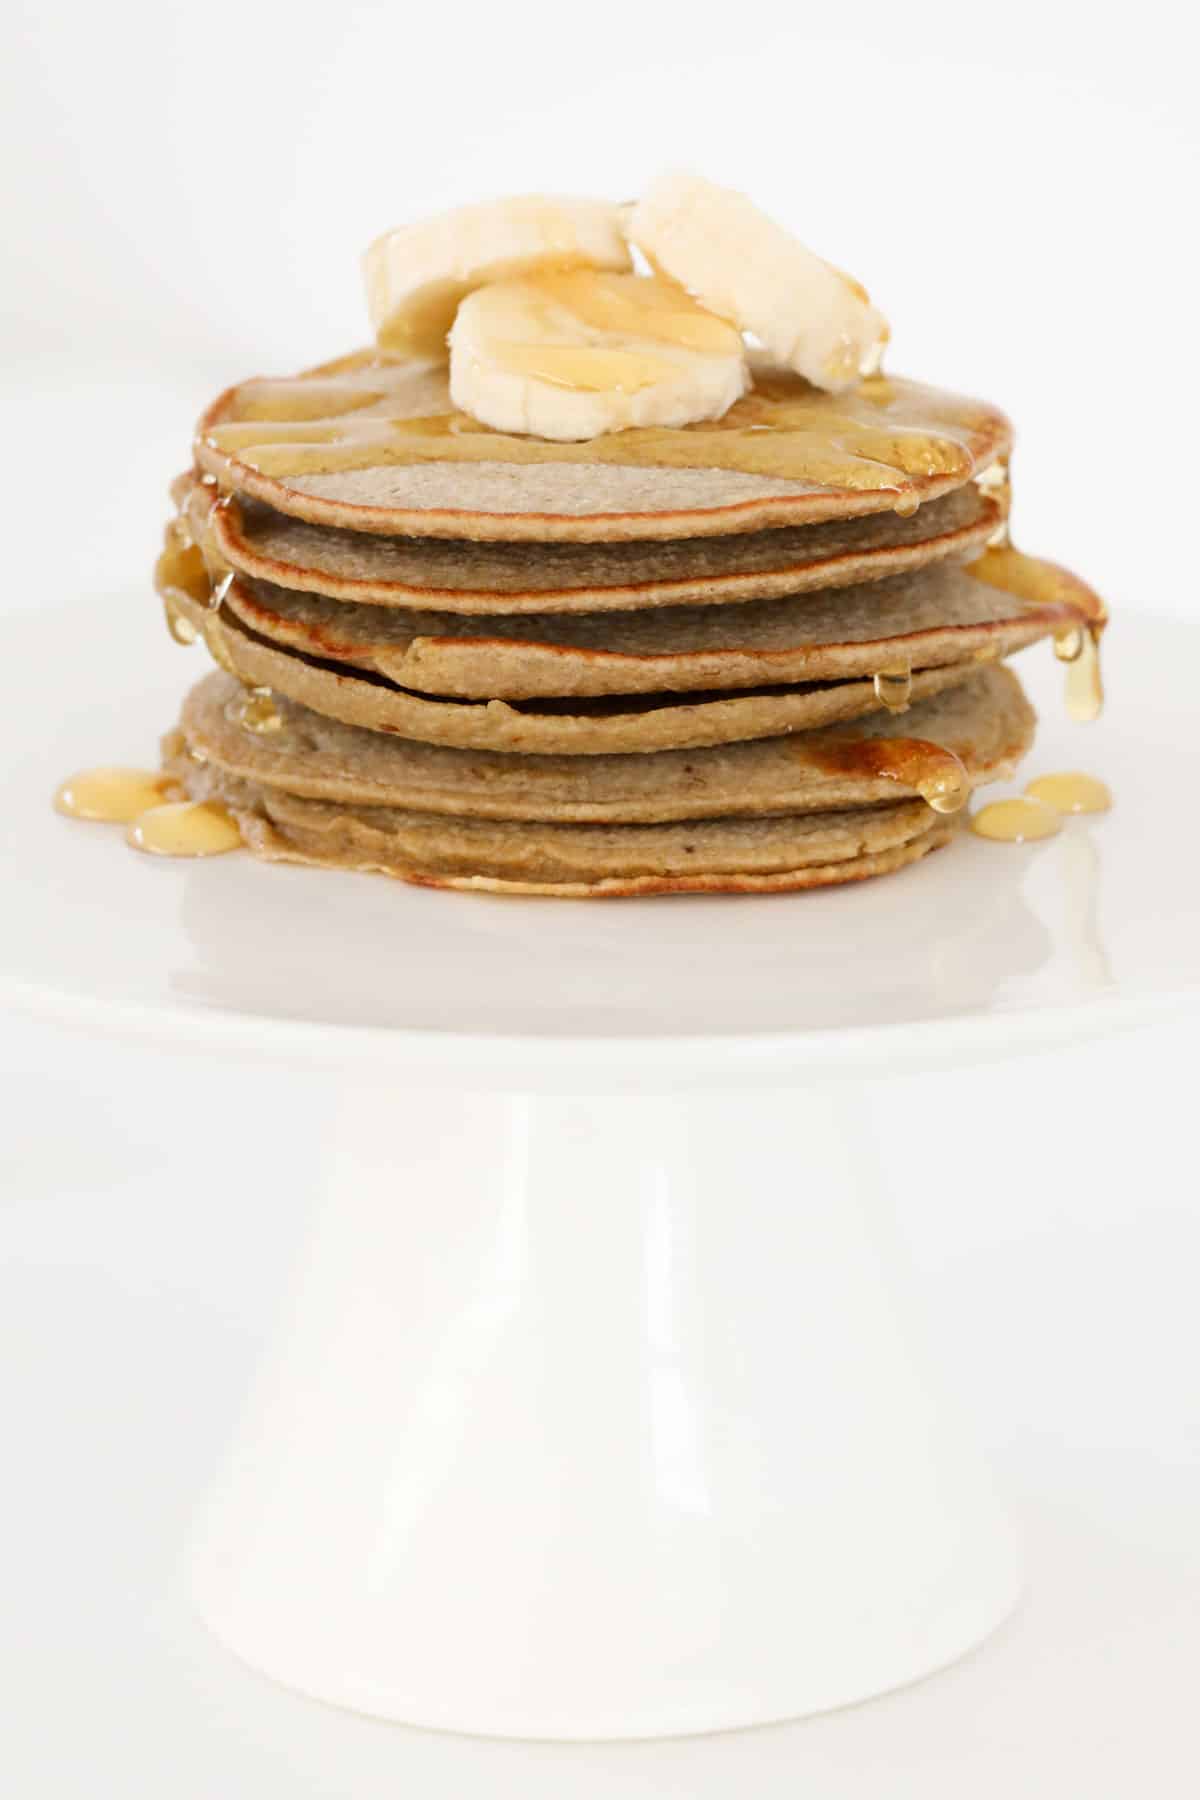 A stack of oat pancakes topped with bananas and honey on a white cake stand.